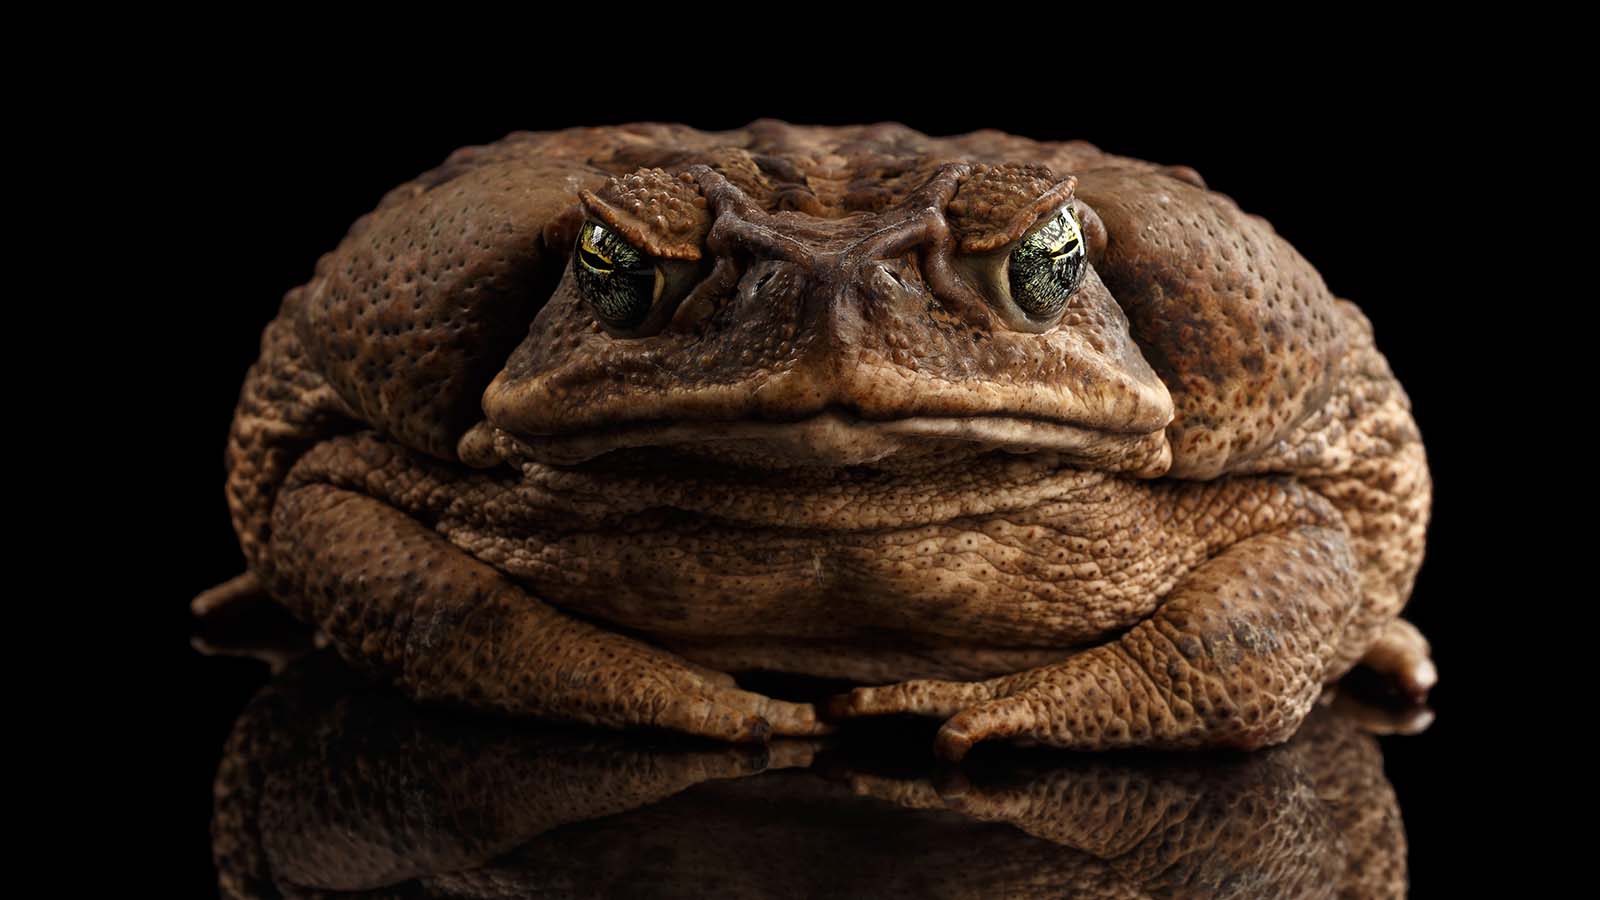 A Cane Toad Against A Black Backdrop